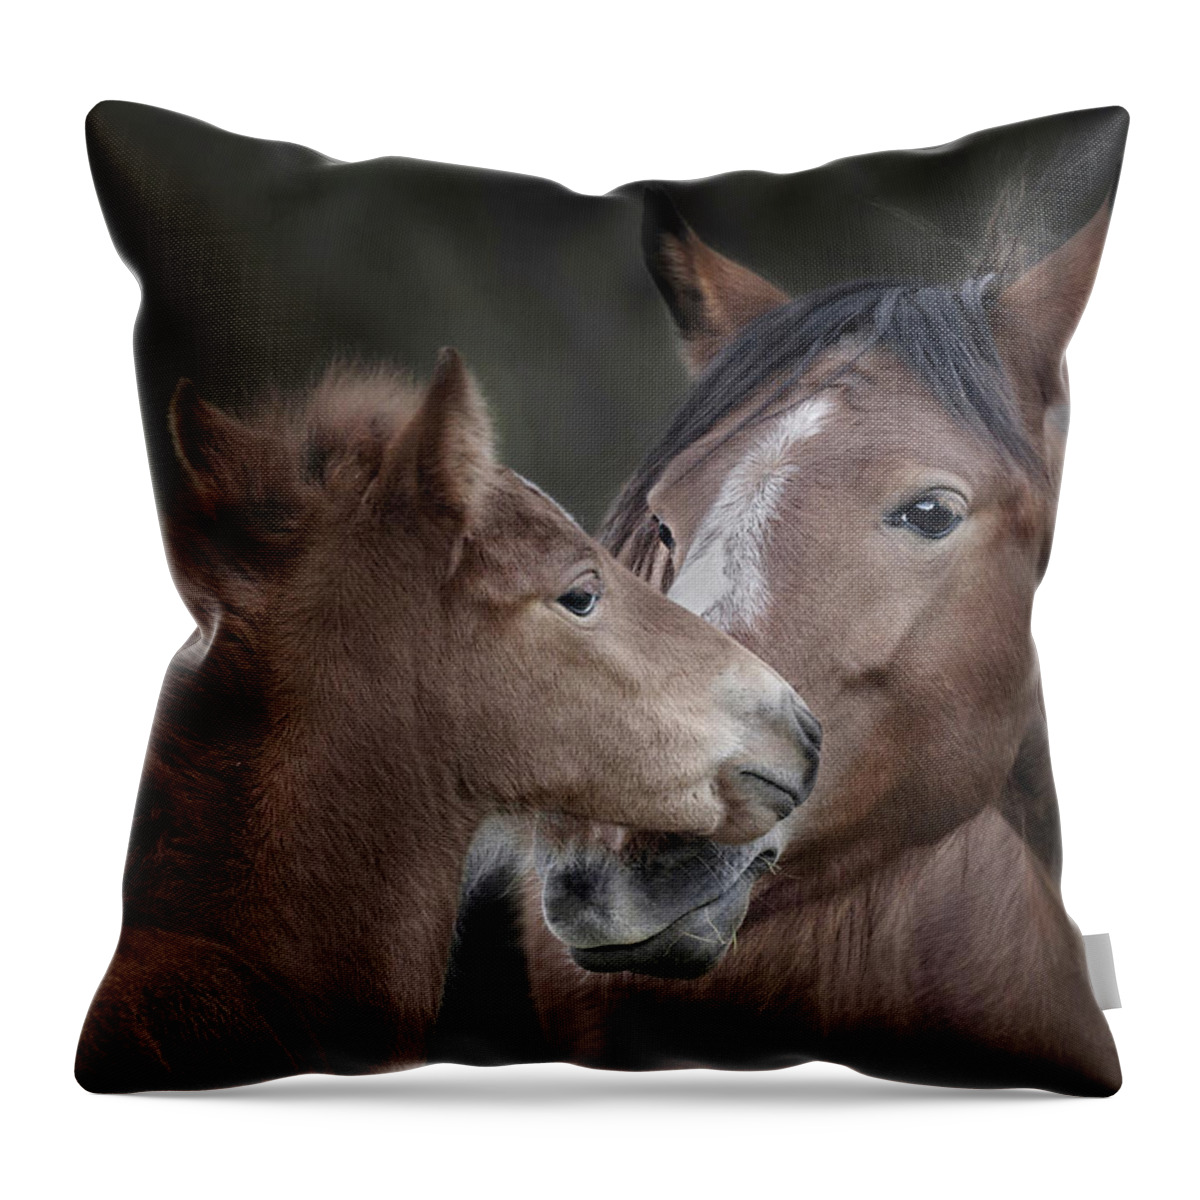 Stallion Throw Pillow featuring the photograph A Mare's Watchful Eye. by Paul Martin